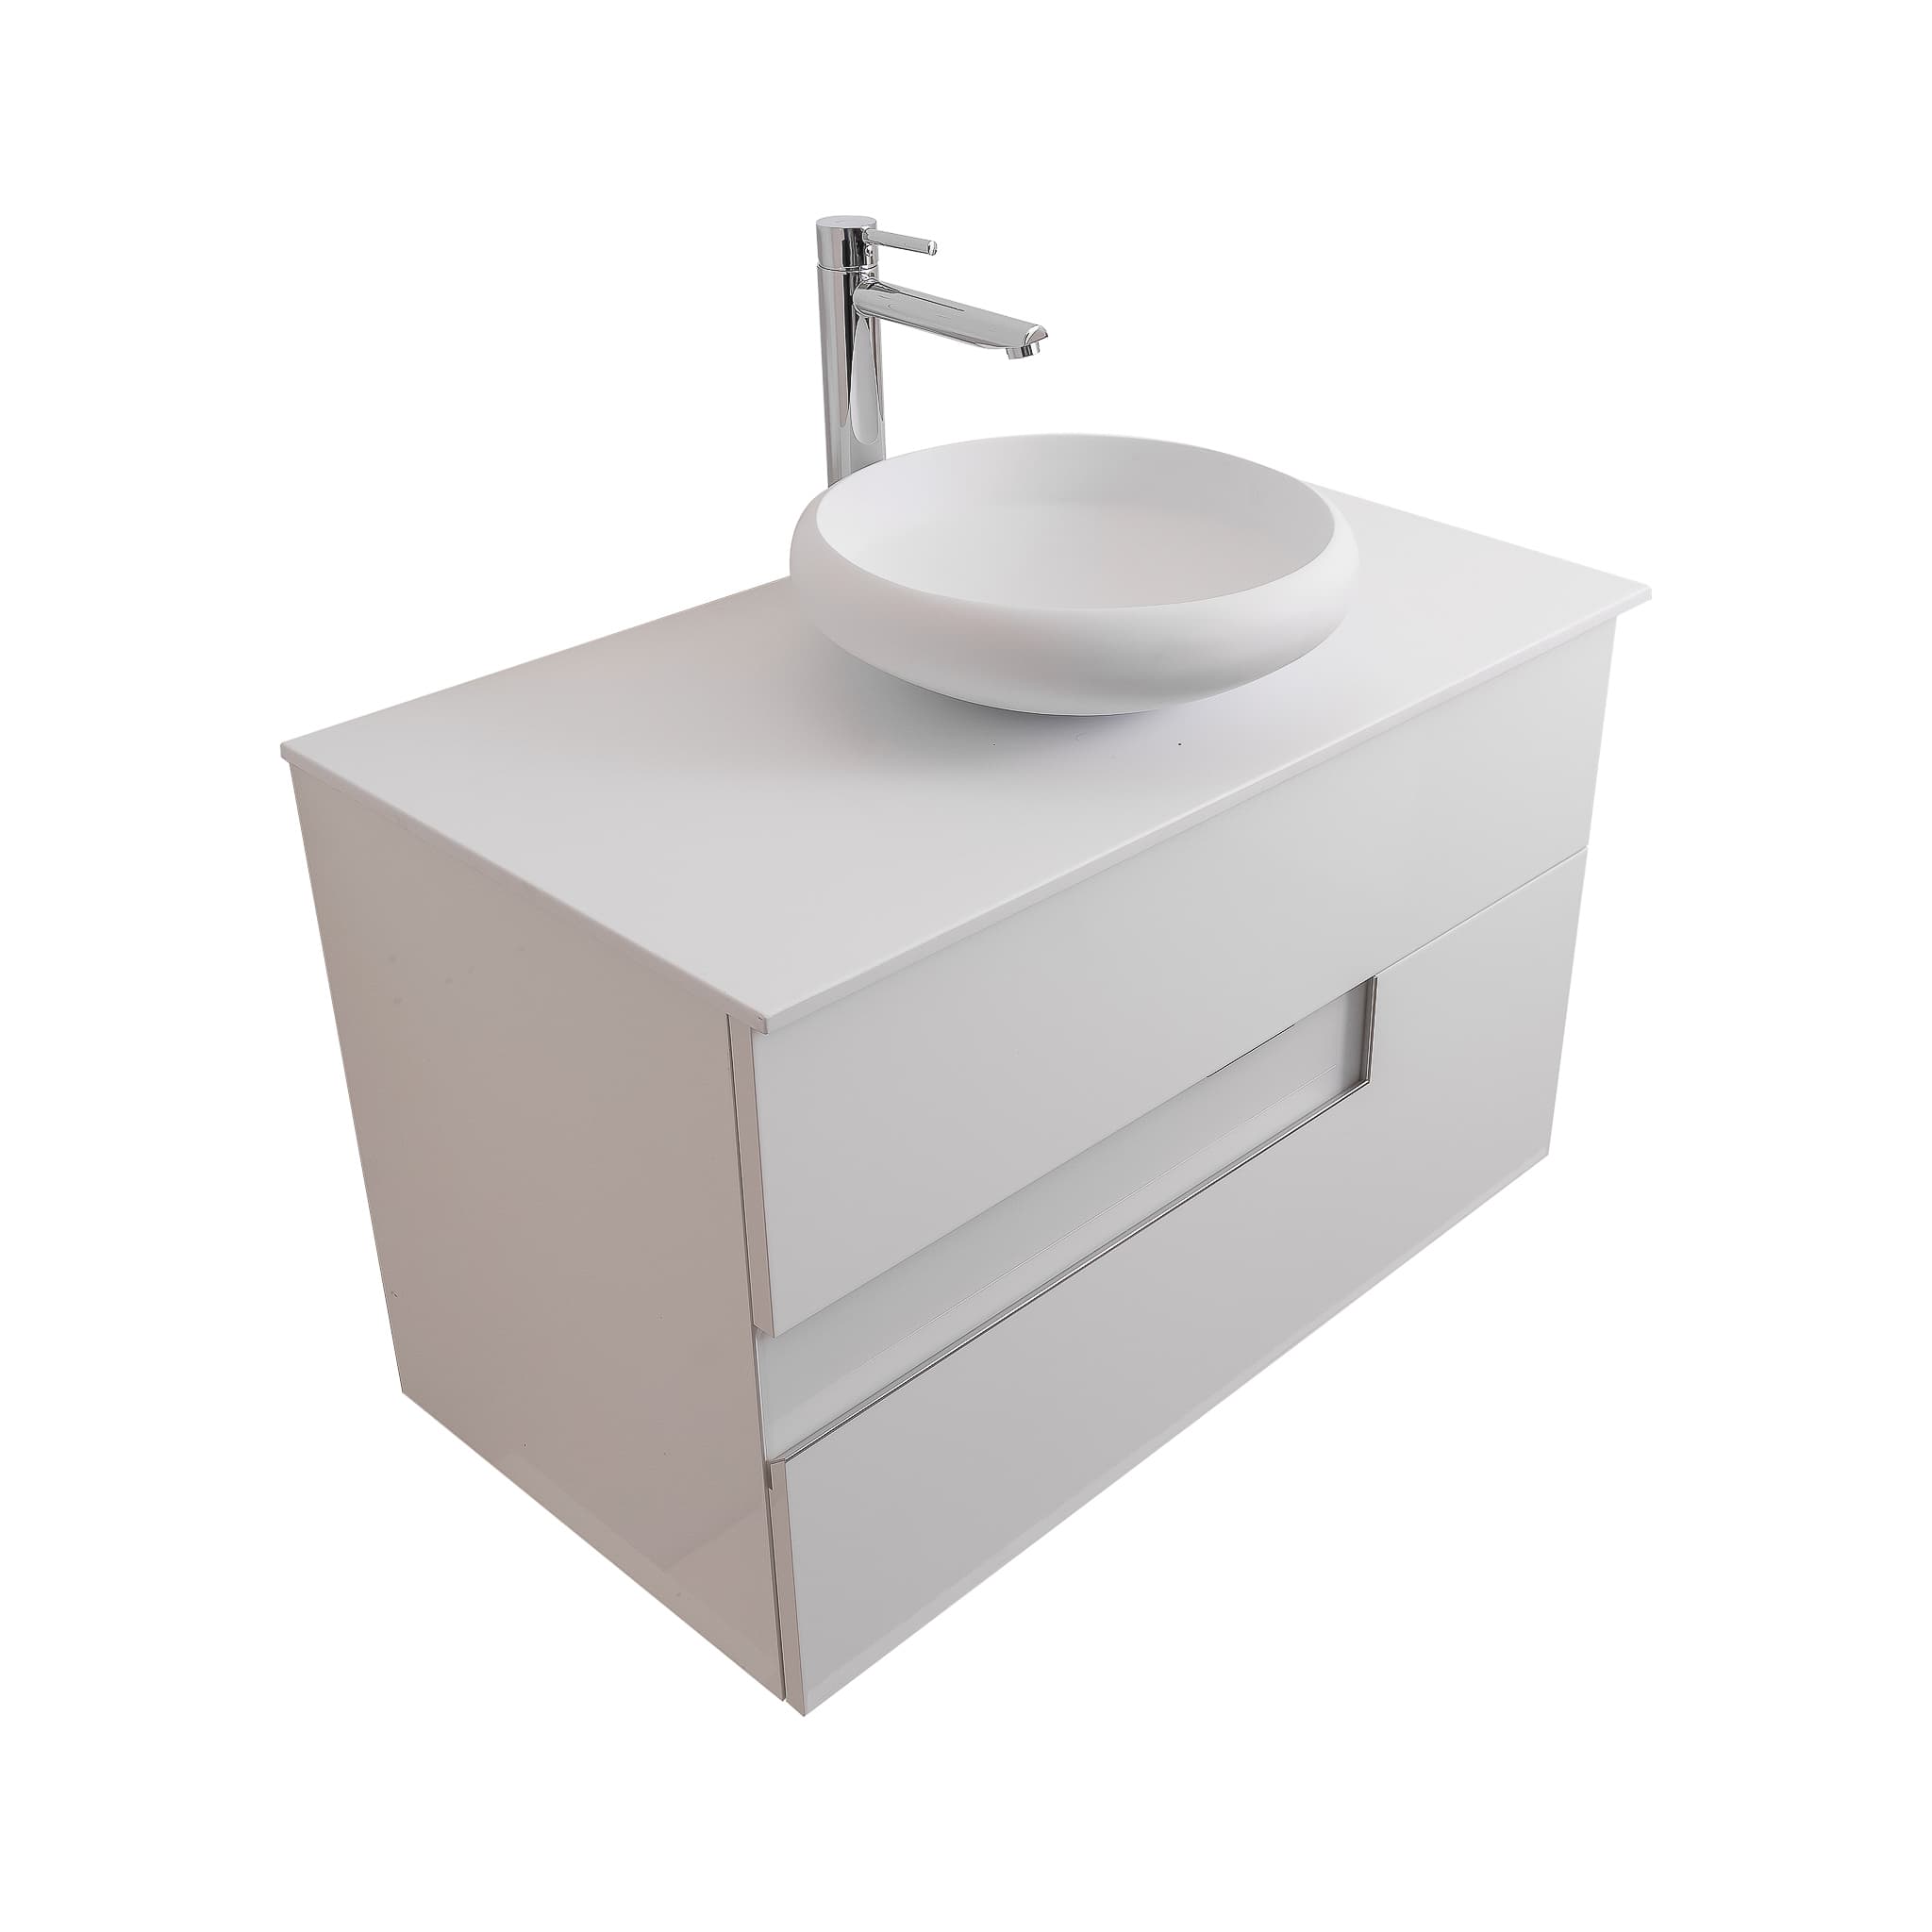 Vision 39.5 White High Gloss Cabinet, Solid Surface Flat White Counter And Round Solid Surface White Basin 1153, Wall Mounted Modern Vanity Set